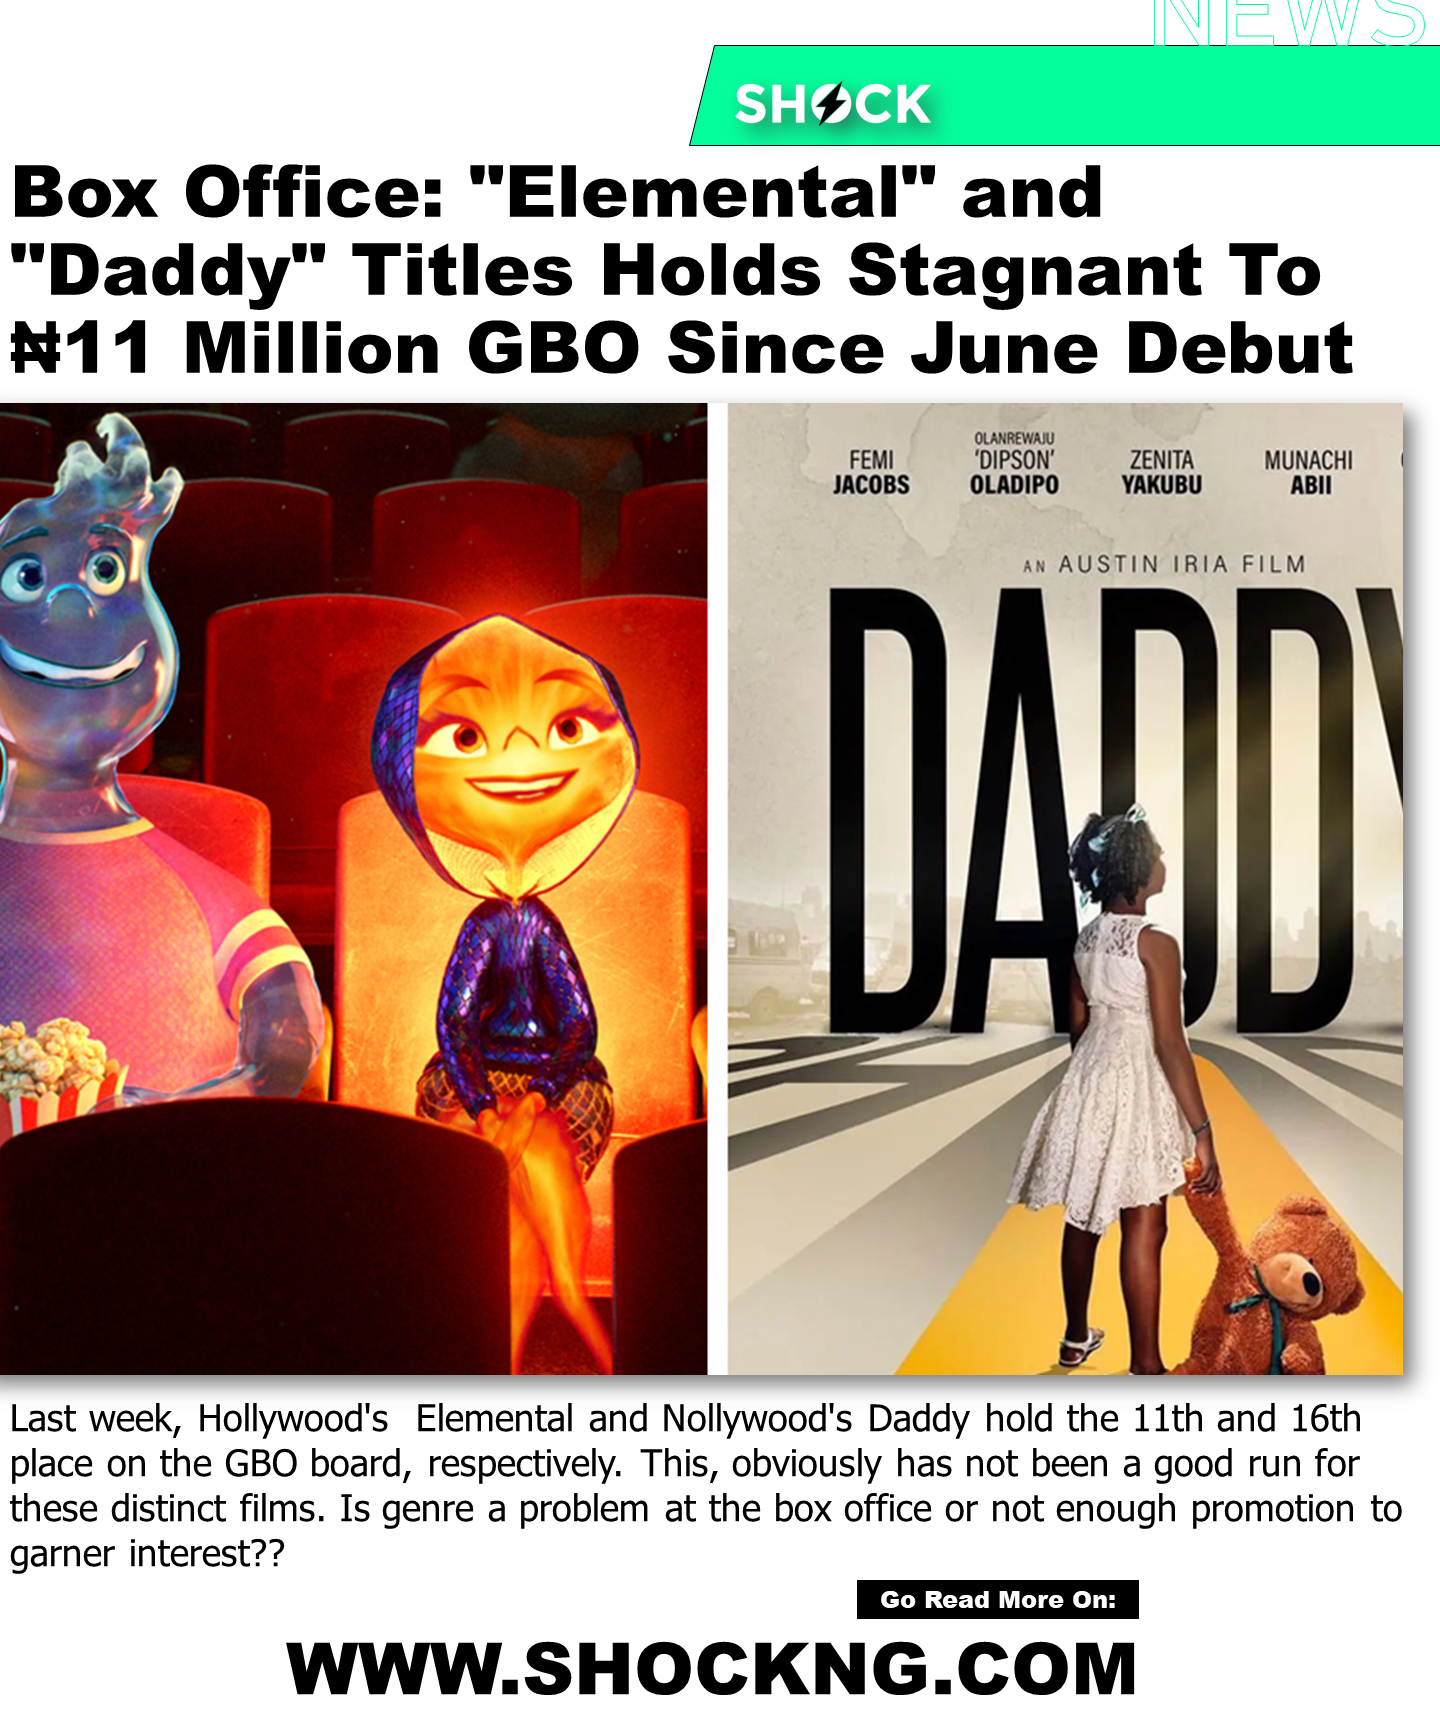 daddy movie in NGN Cinemas - "Elemental" and "Daddy" Holds Stagnant to ₦11 million Gross Box Office